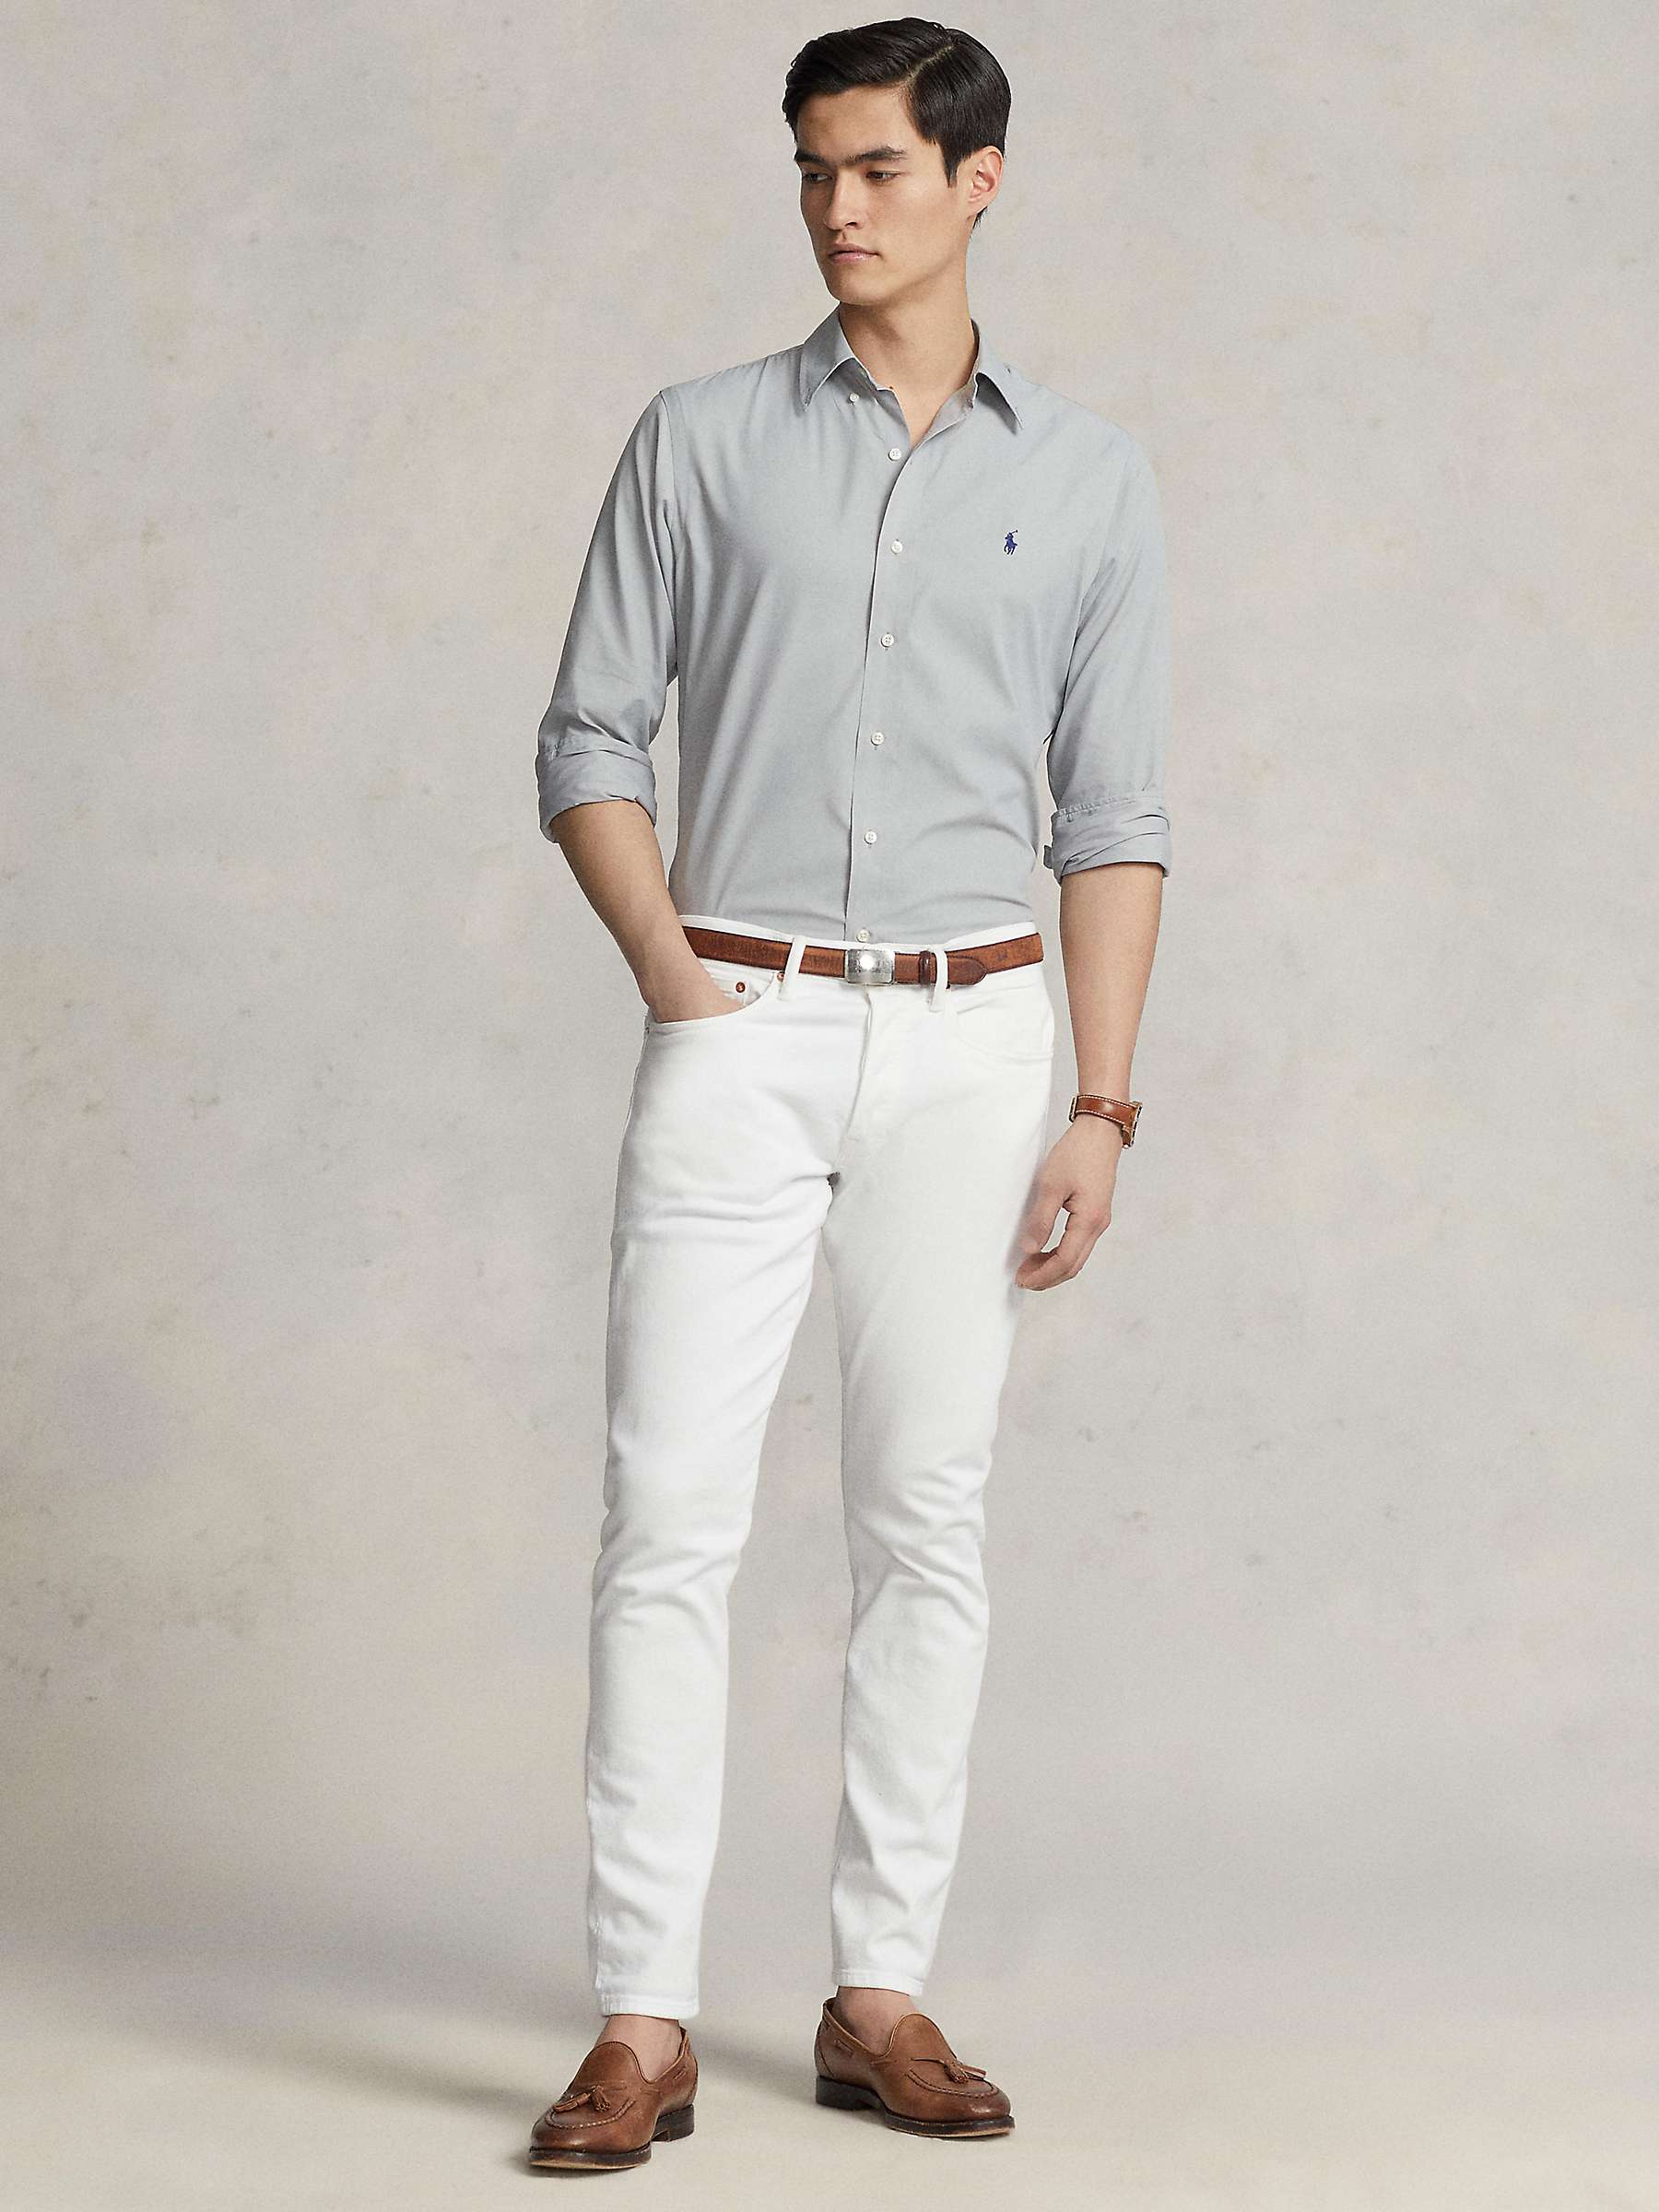 Buy Polo Ralph Lauren Long Sleeve Classic Fit Performance Twill Shirt Online at johnlewis.com